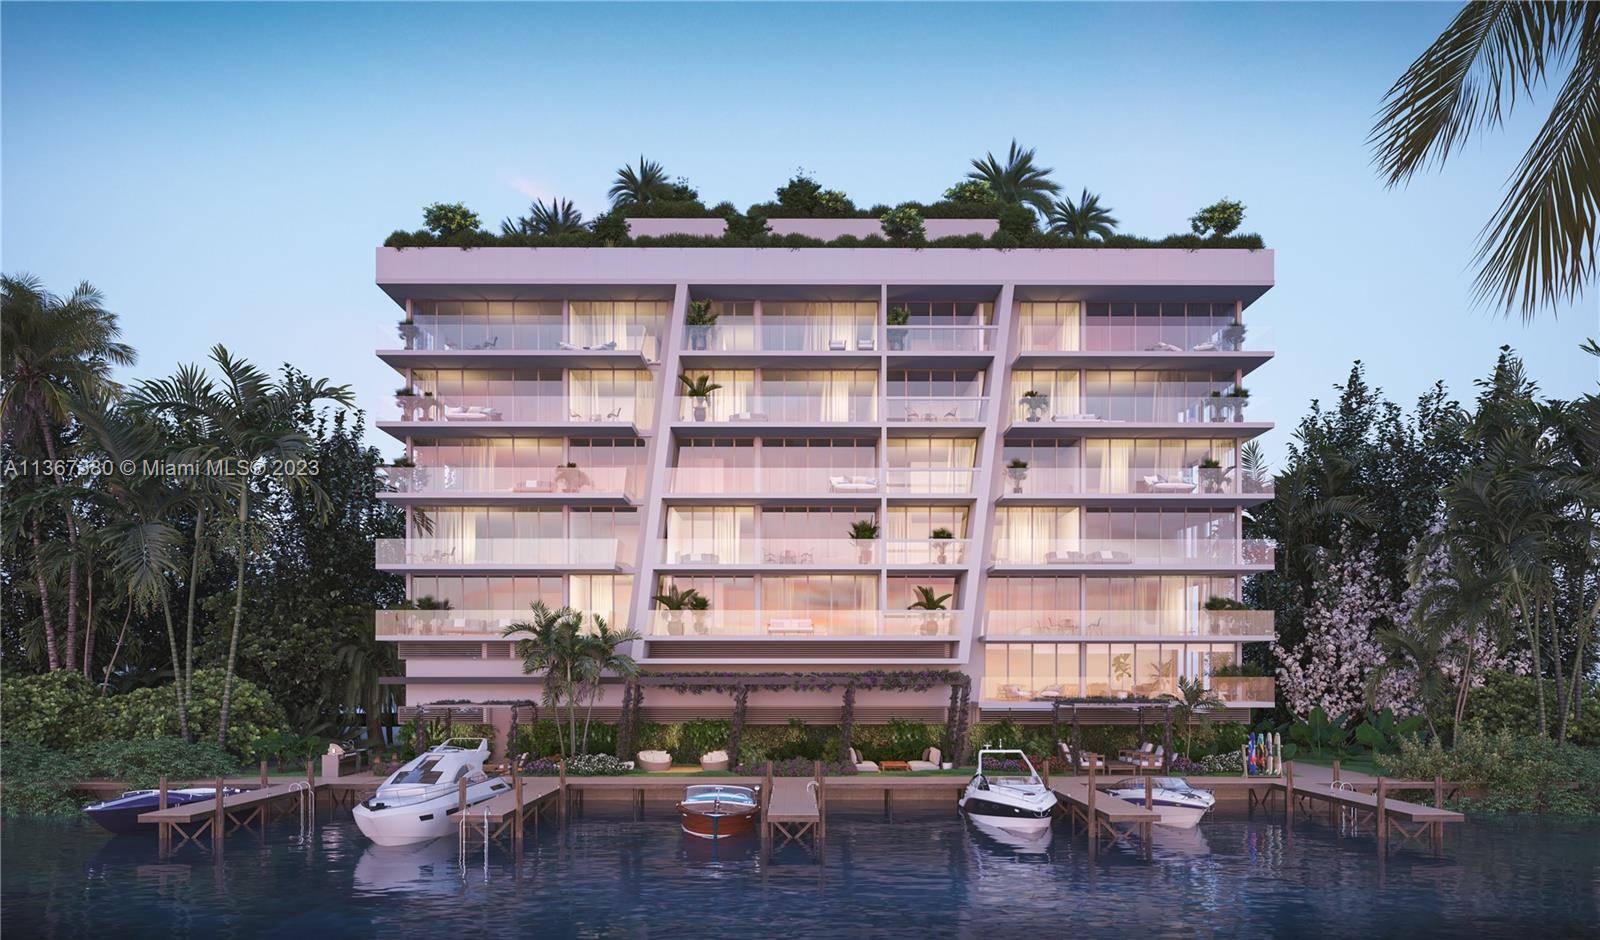 2 bed 2. 5 baths unit. Introducing elevated island living Indulge in the ultimate luxurious waterfront living at 9900 West, the exclusive and intimate boutique building of only 23 sophisticated ...